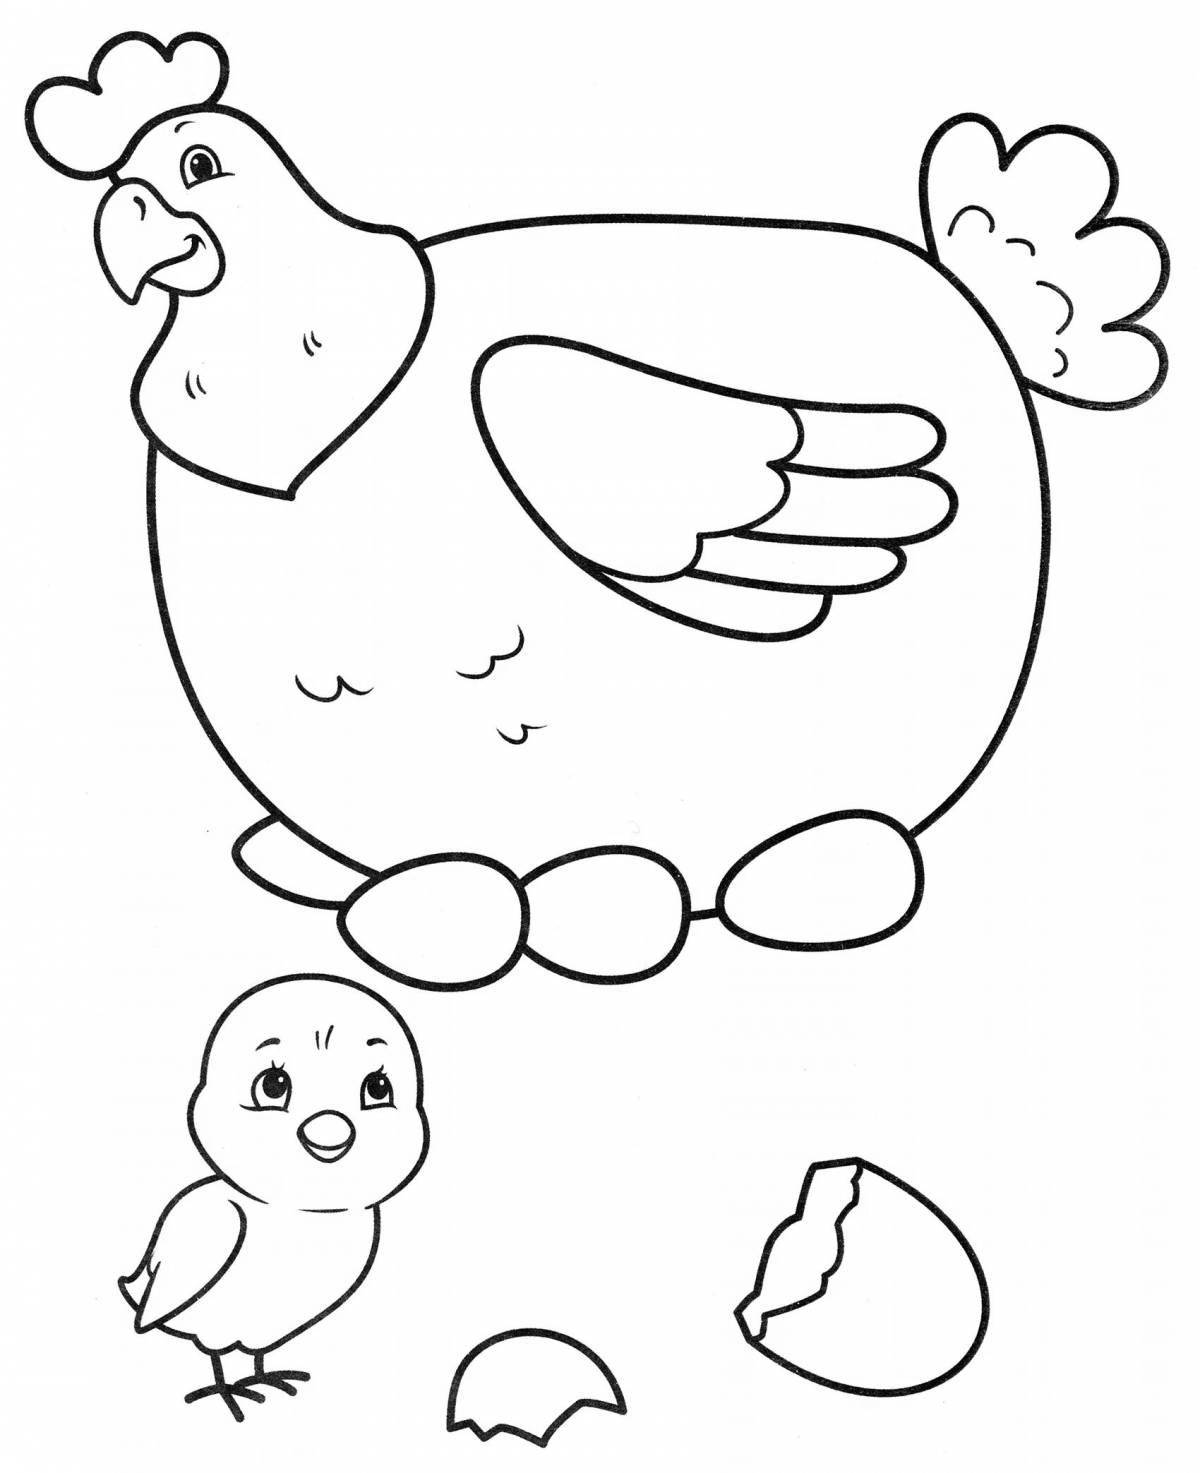 Living grains for chicken coloring page